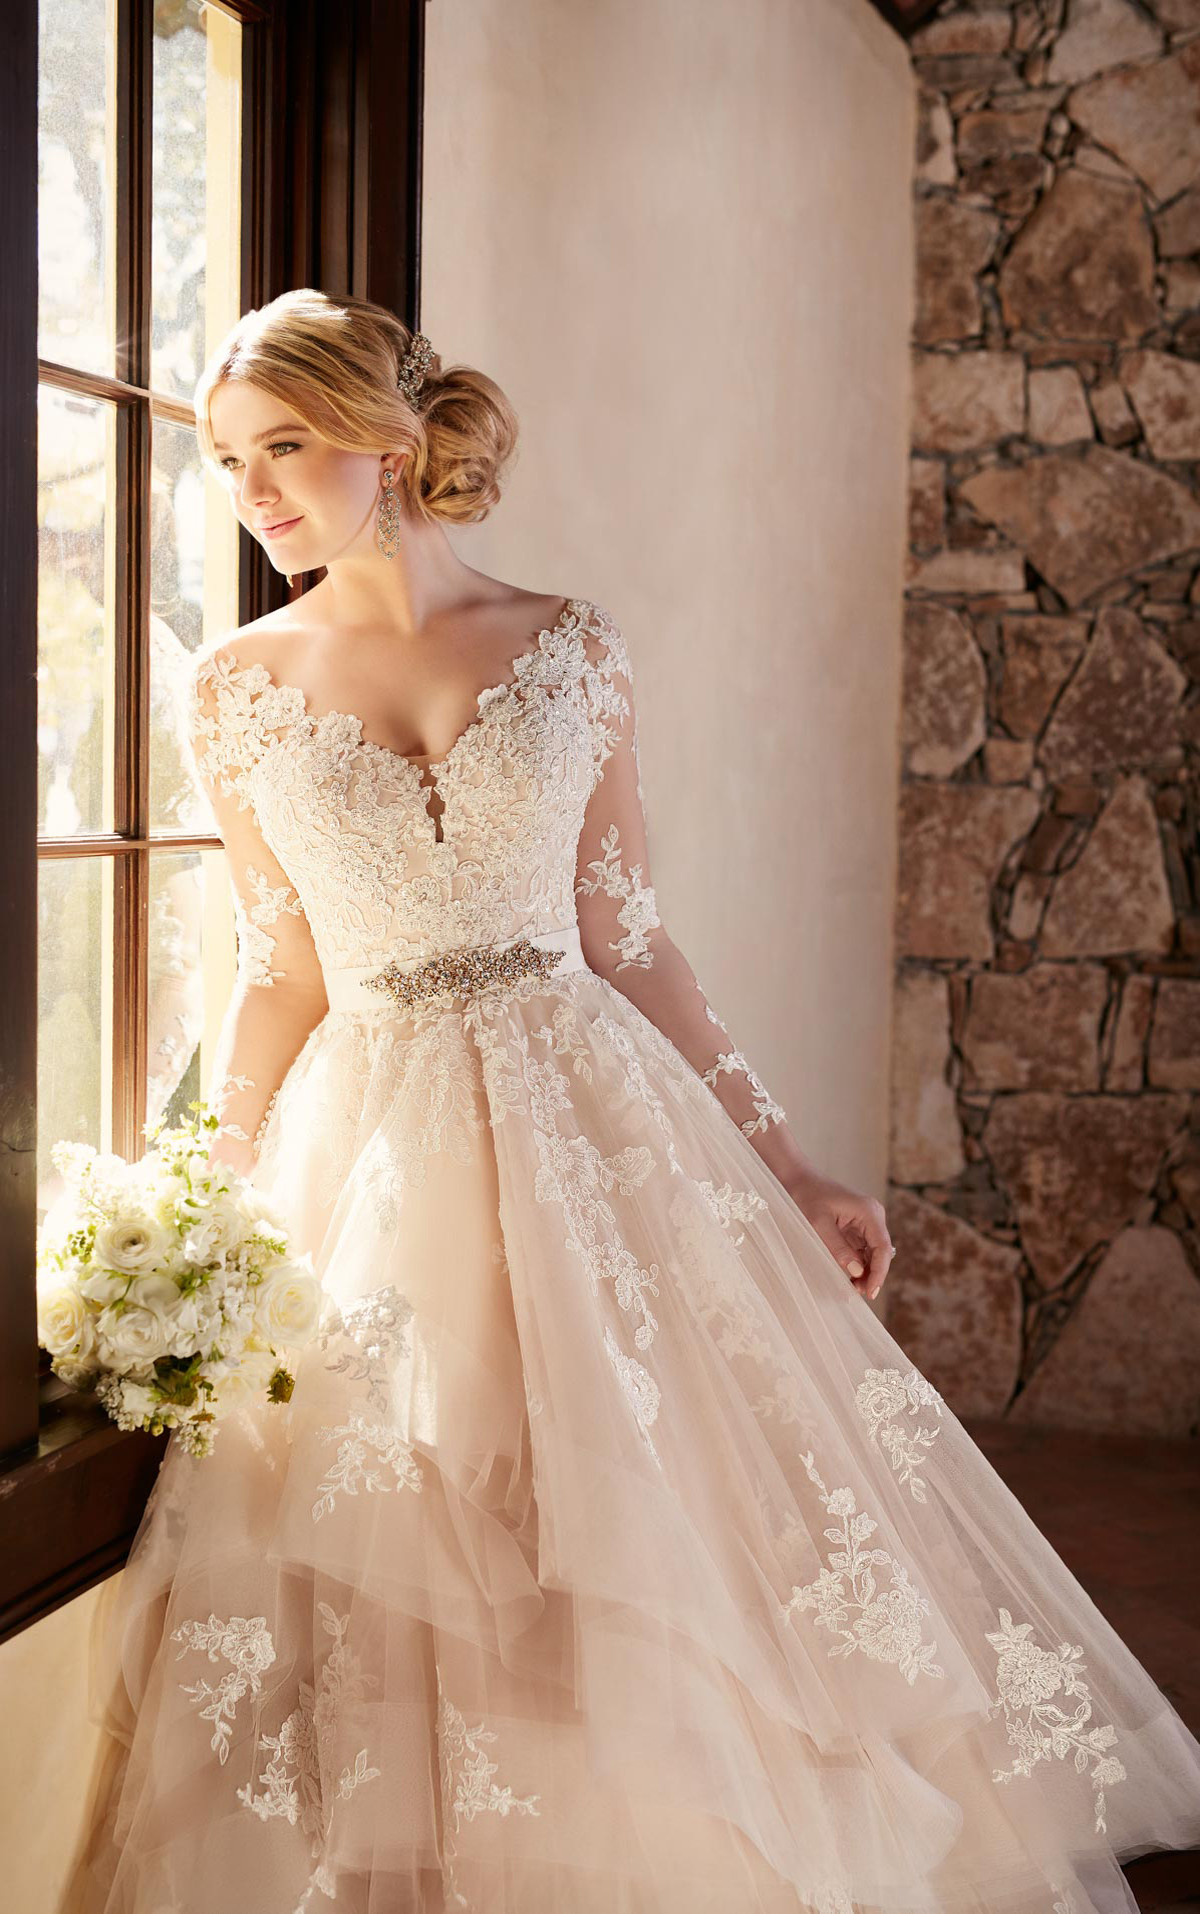 Wedding Dress With Lace Sleeves
 Sleeved Wedding Dresses